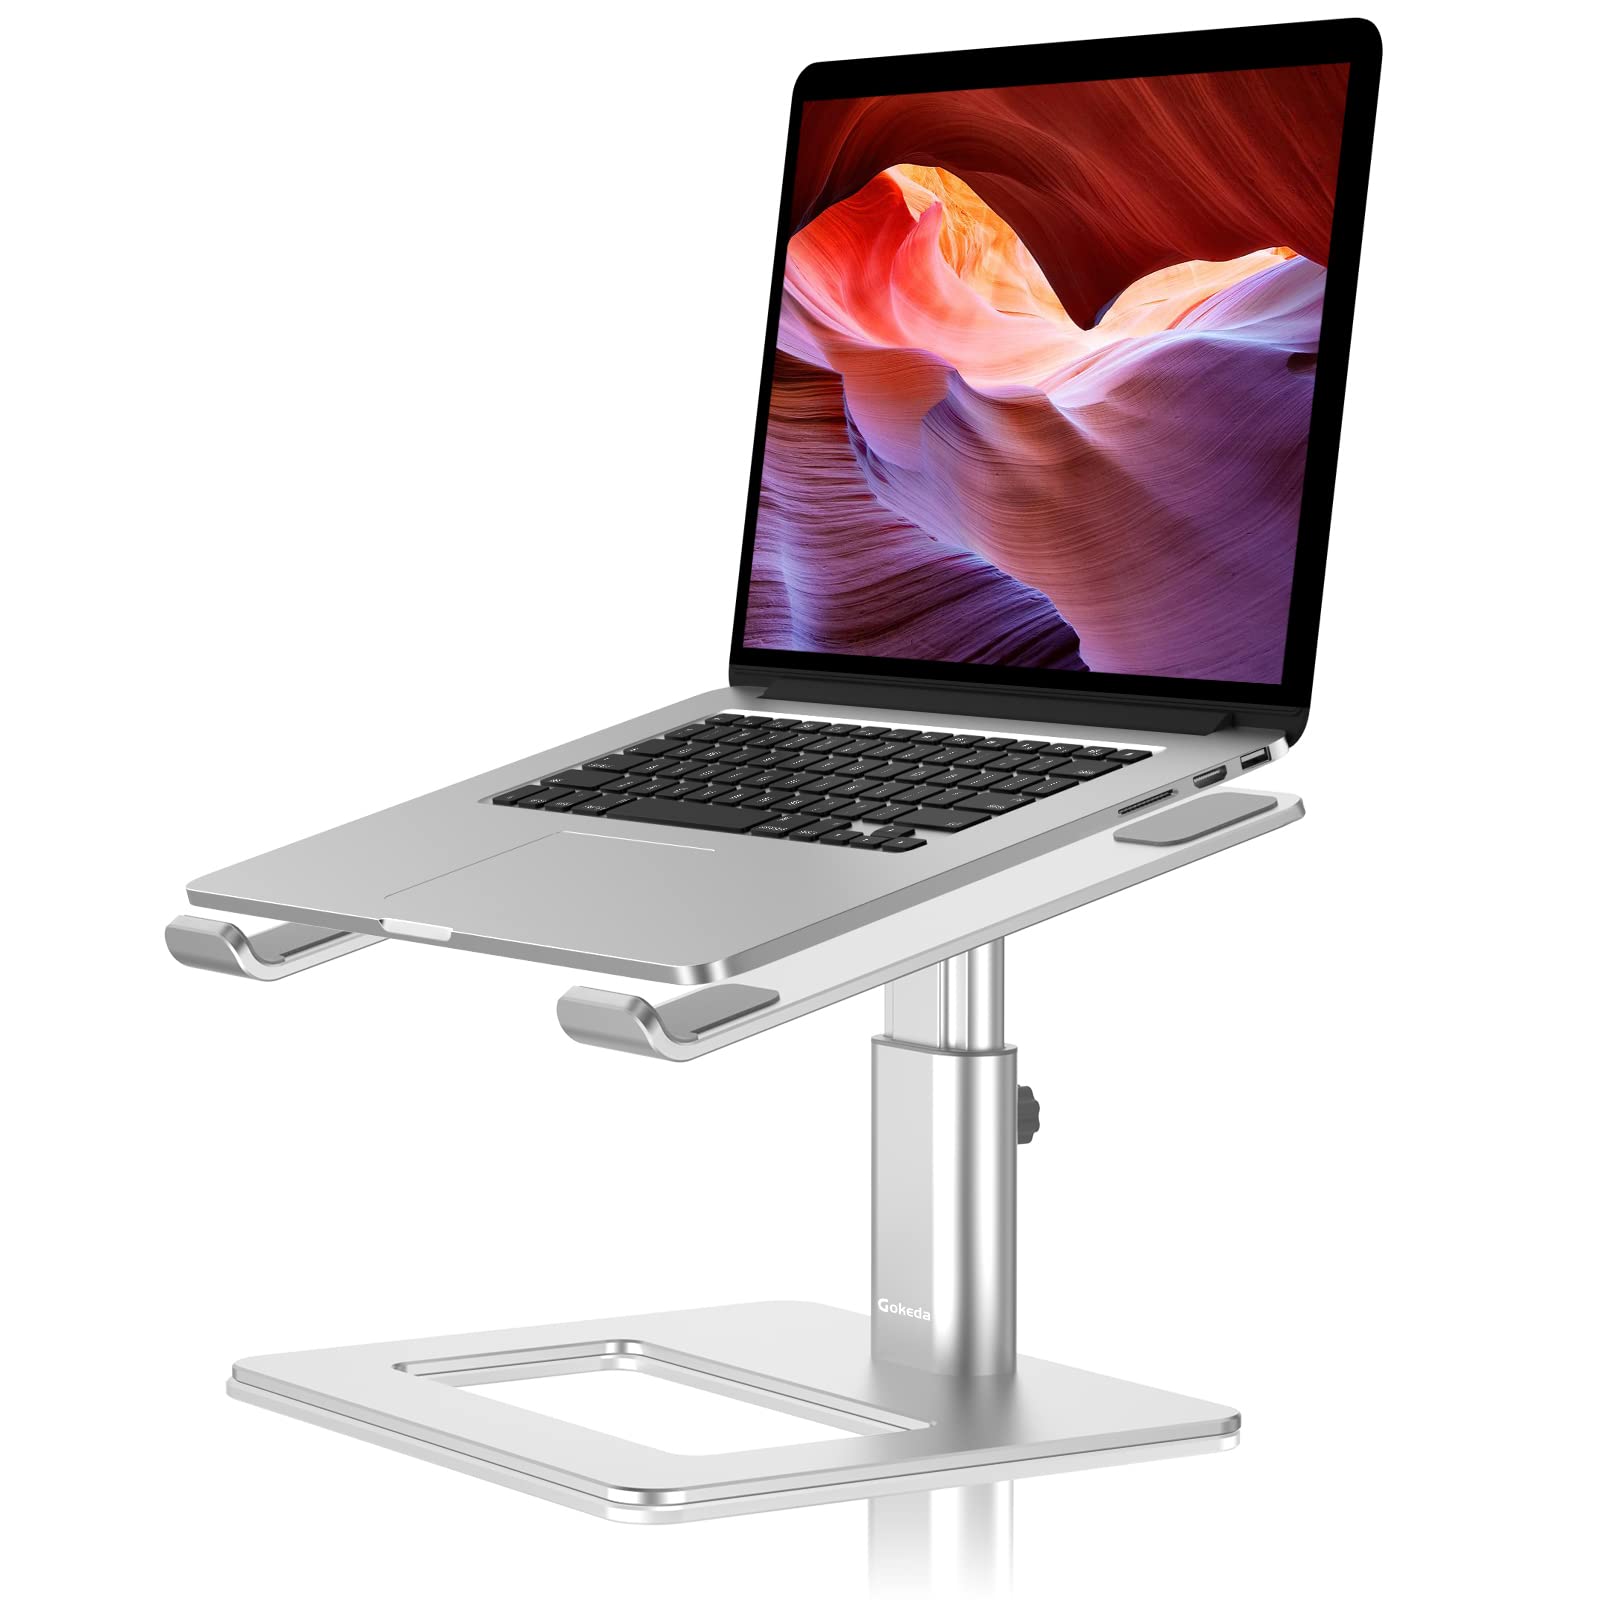 Gokeda Laptop Stand, Ergonomic Adjustable Computer Stand, Aluminium Alloy Height Holder Riser Compatible with MacBook Air Pro, Dell, HP, Lenovo Samsung (More 11-17" Laptops)